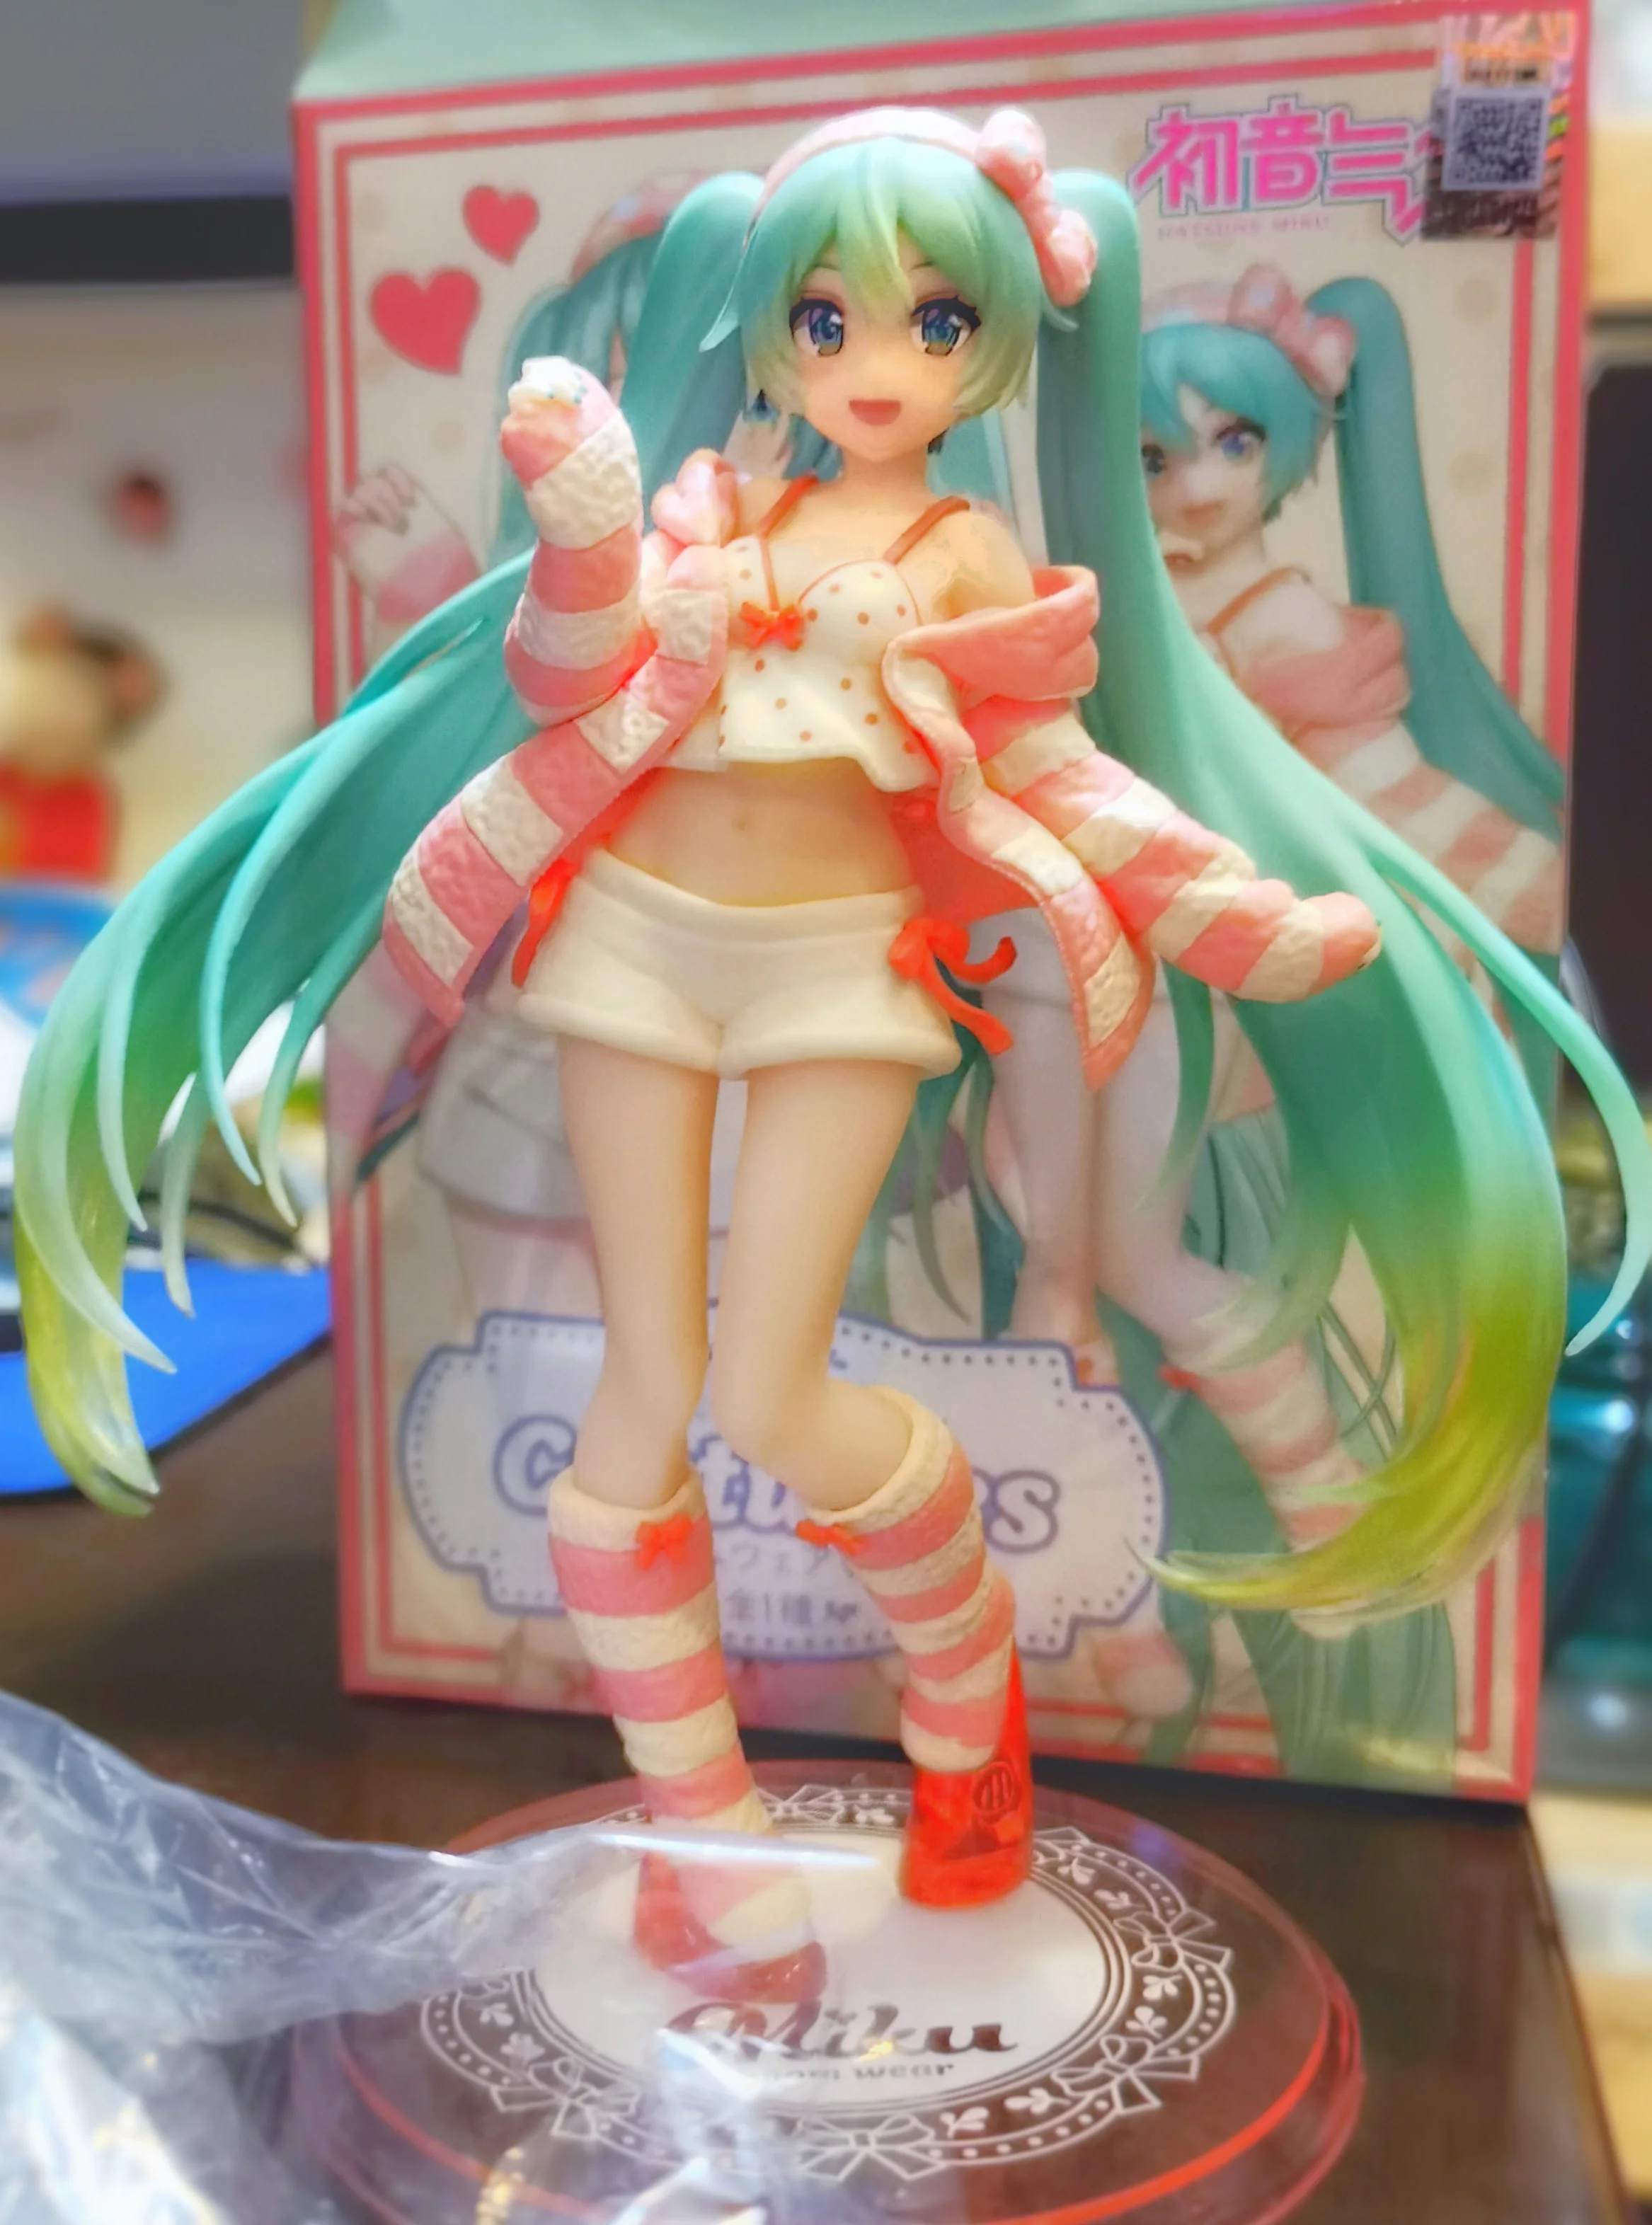 Hatsune Miku costumes room wear plain clothes figure from japan 